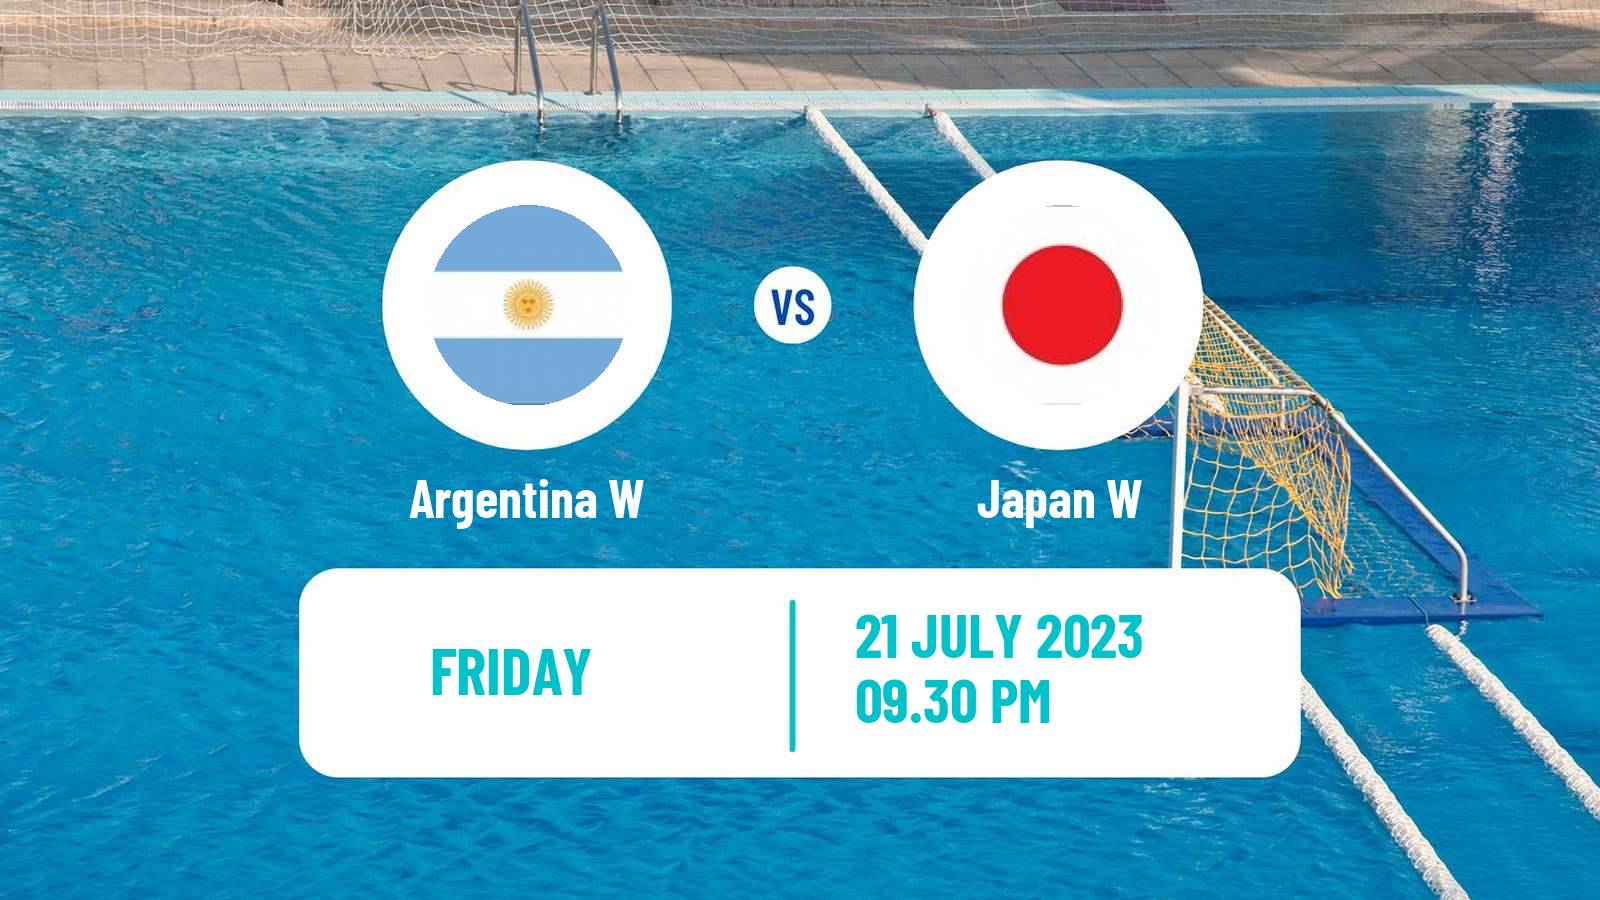 Water polo World Championship Water Polo Women Argentina W - Japan W